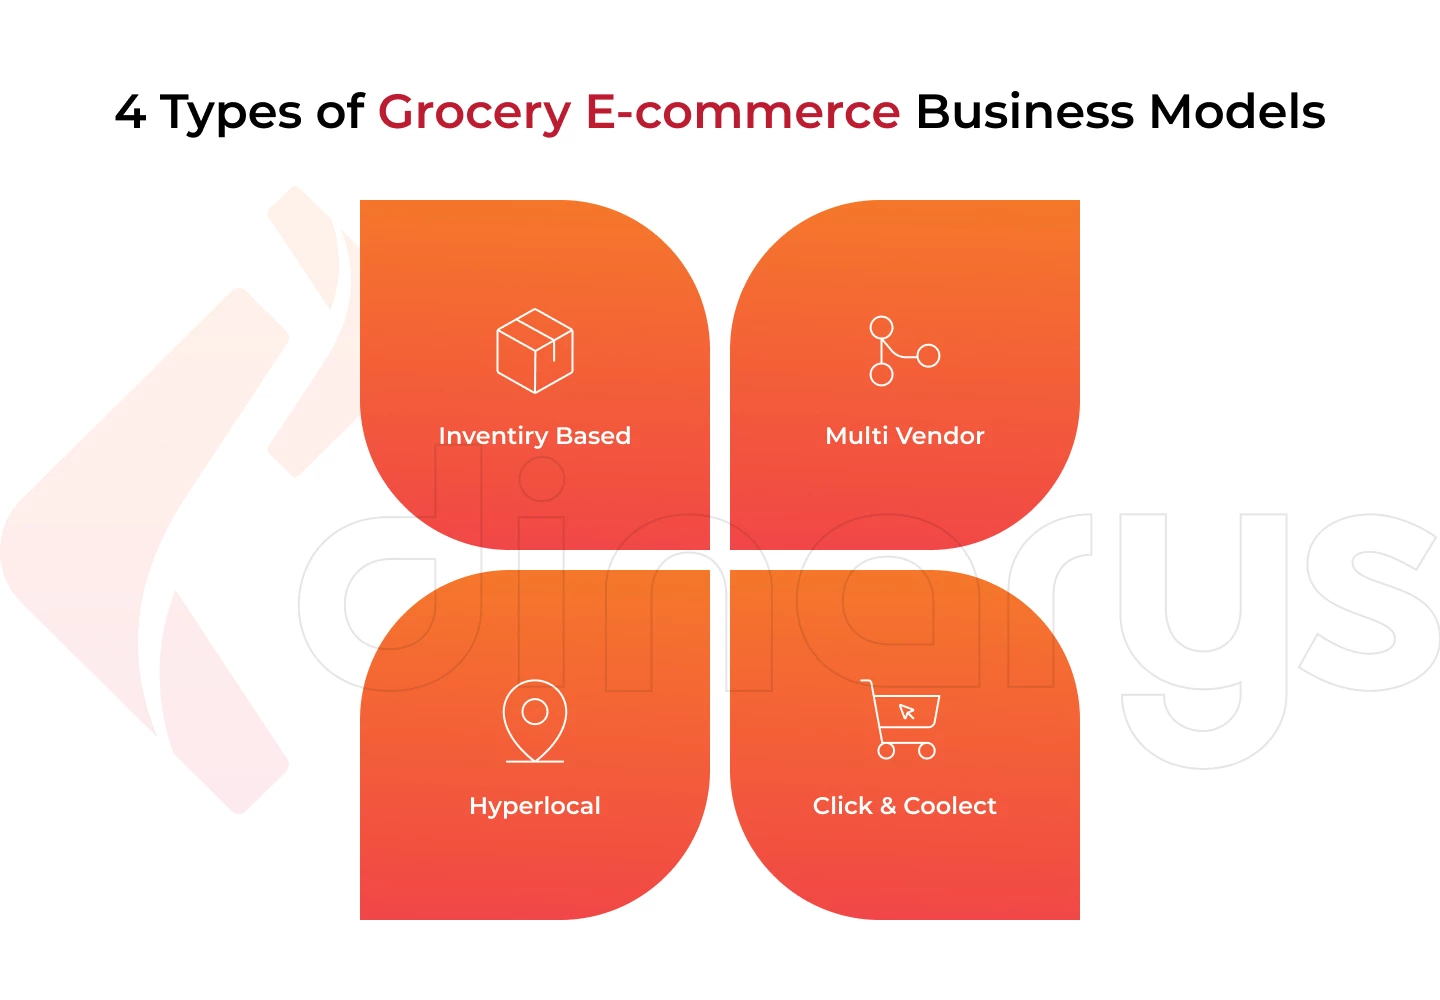 Main Online Groccery Business Models